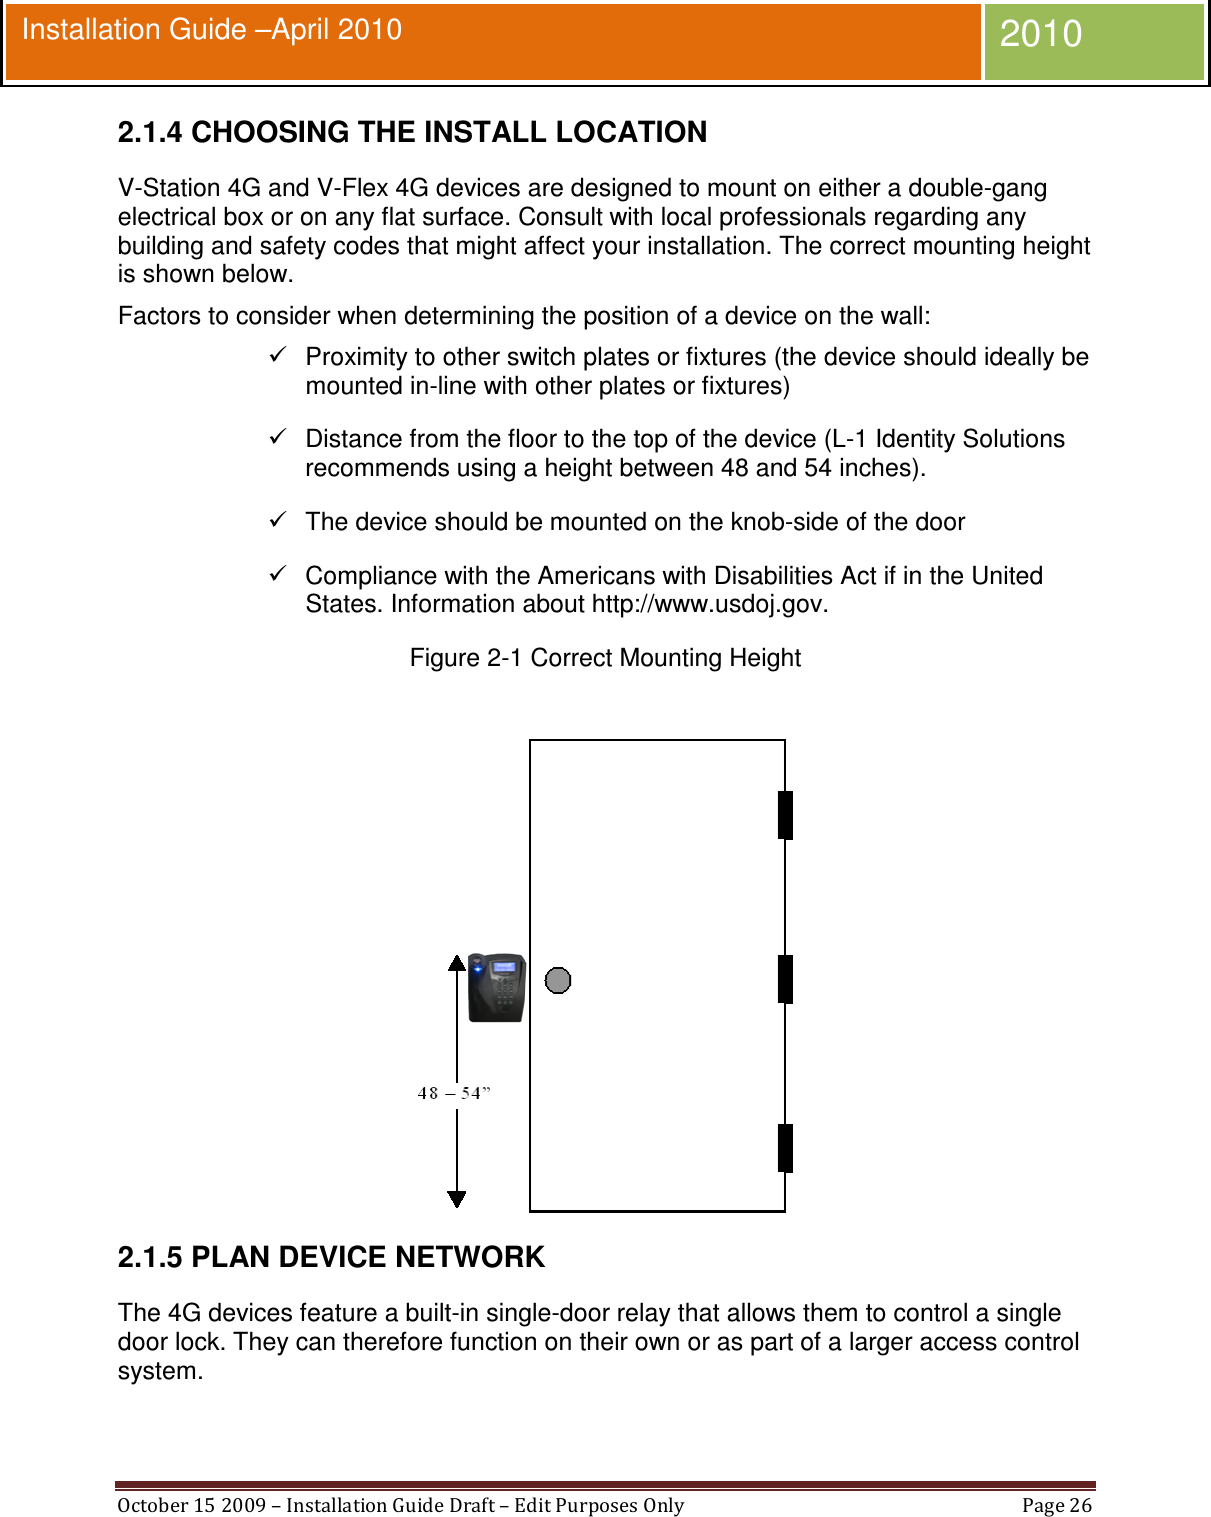  October 15 2009 – Installation Guide Draft – Edit Purposes Only  Page 26  Installation Guide –April 2010 2010 2.1.4 CHOOSING THE INSTALL LOCATION V-Station 4G and V-Flex 4G devices are designed to mount on either a double-gang electrical box or on any flat surface. Consult with local professionals regarding any building and safety codes that might affect your installation. The correct mounting height is shown below. Factors to consider when determining the position of a device on the wall:   Proximity to other switch plates or fixtures (the device should ideally be mounted in-line with other plates or fixtures)   Distance from the floor to the top of the device (L-1 Identity Solutions recommends using a height between 48 and 54 inches).   The device should be mounted on the knob-side of the door   Compliance with the Americans with Disabilities Act if in the United States. Information about http://www.usdoj.gov. Figure 2-1 Correct Mounting Height   2.1.5 PLAN DEVICE NETWORK The 4G devices feature a built-in single-door relay that allows them to control a single door lock. They can therefore function on their own or as part of a larger access control system. 